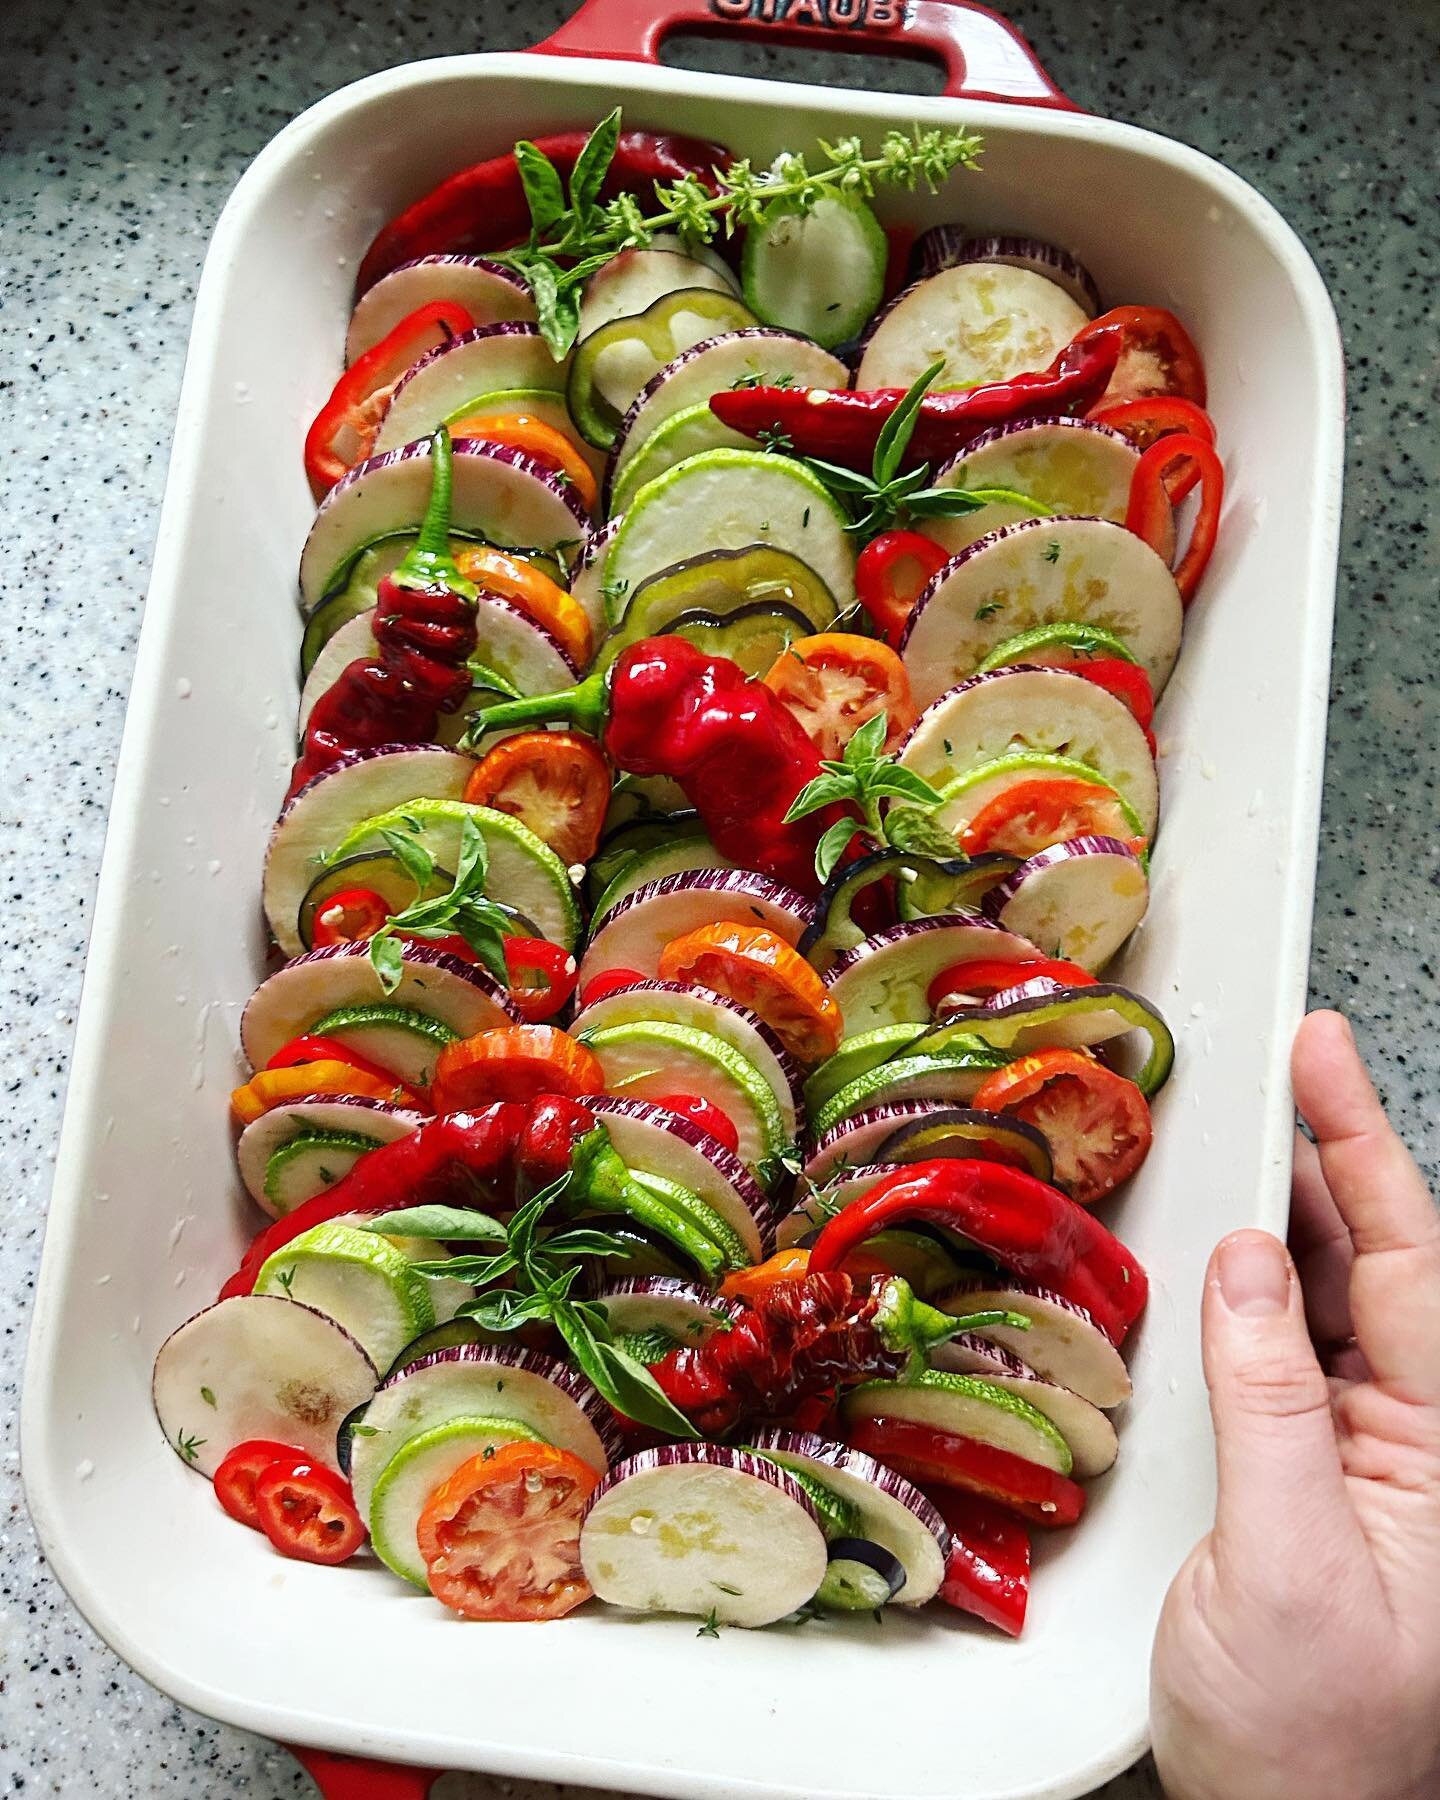 In a recent conversation on @foodfriendspod, @karilauritzenla inspired me to make one of my favorite September dishes: ratatouille. 🍅🫑

Inspired by @smittenkitchen&rsquo;s version (inspired by the movie version), I layer eggplants, peppers, zucchin